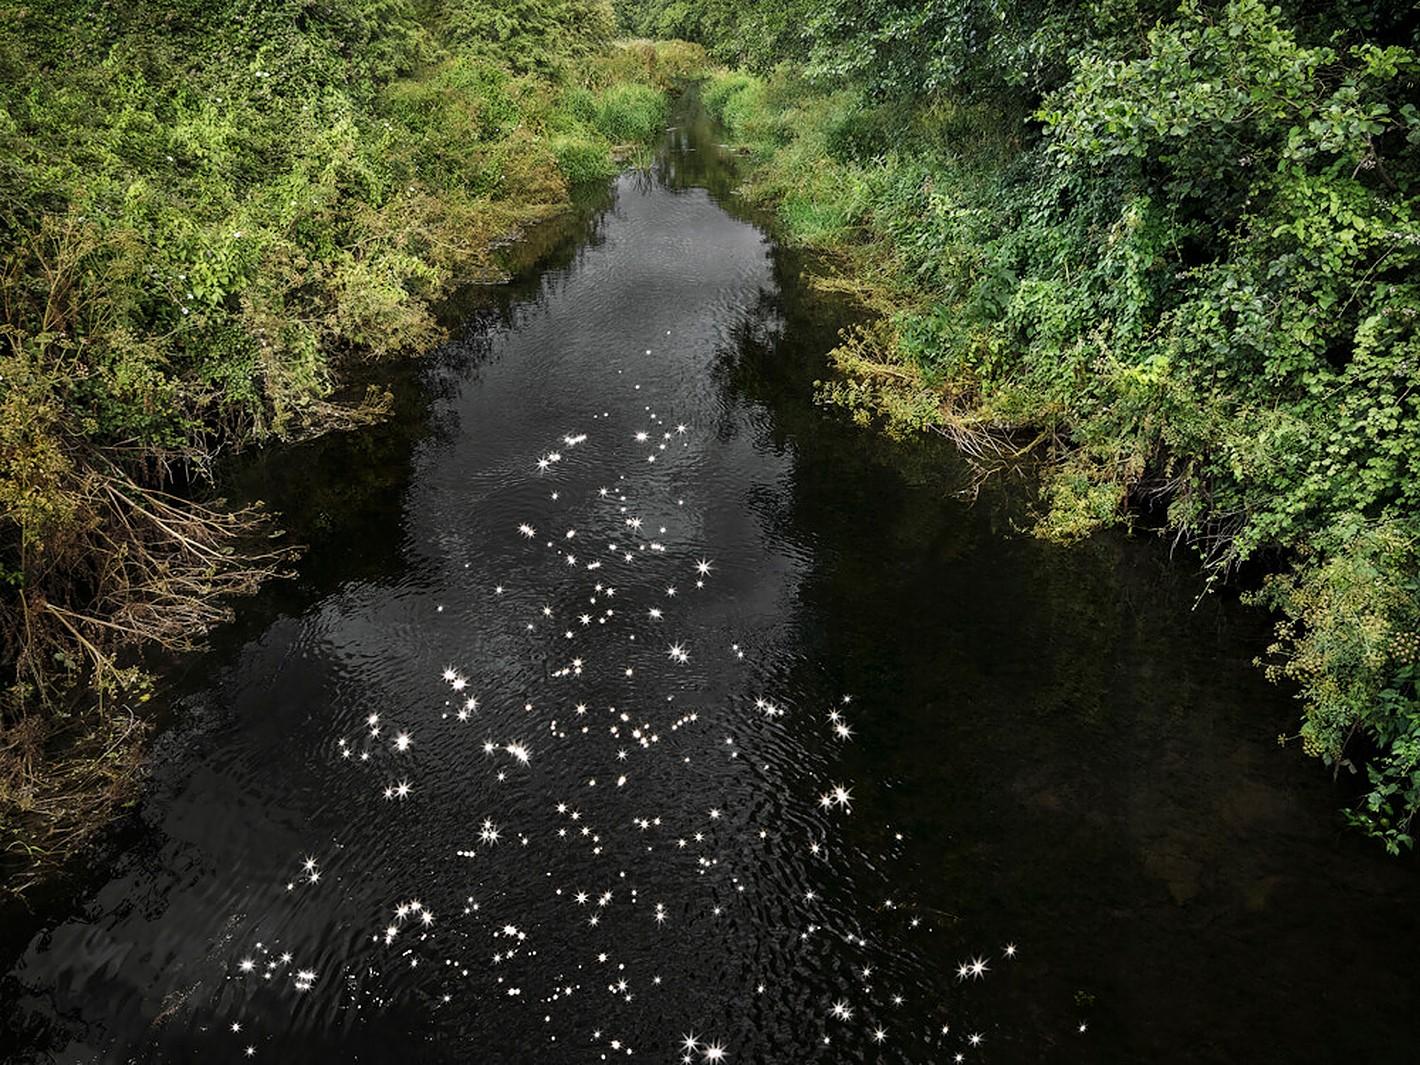 All prints are produced to order and lead times are expected between 15-20 days.

Chalk Streams 8 is a stunning C-Type Print on Fuji Crystal Archive Paper in Maxima Matte. This size print is available in an Edition of 7 + 2 Artist Proofs.

In her